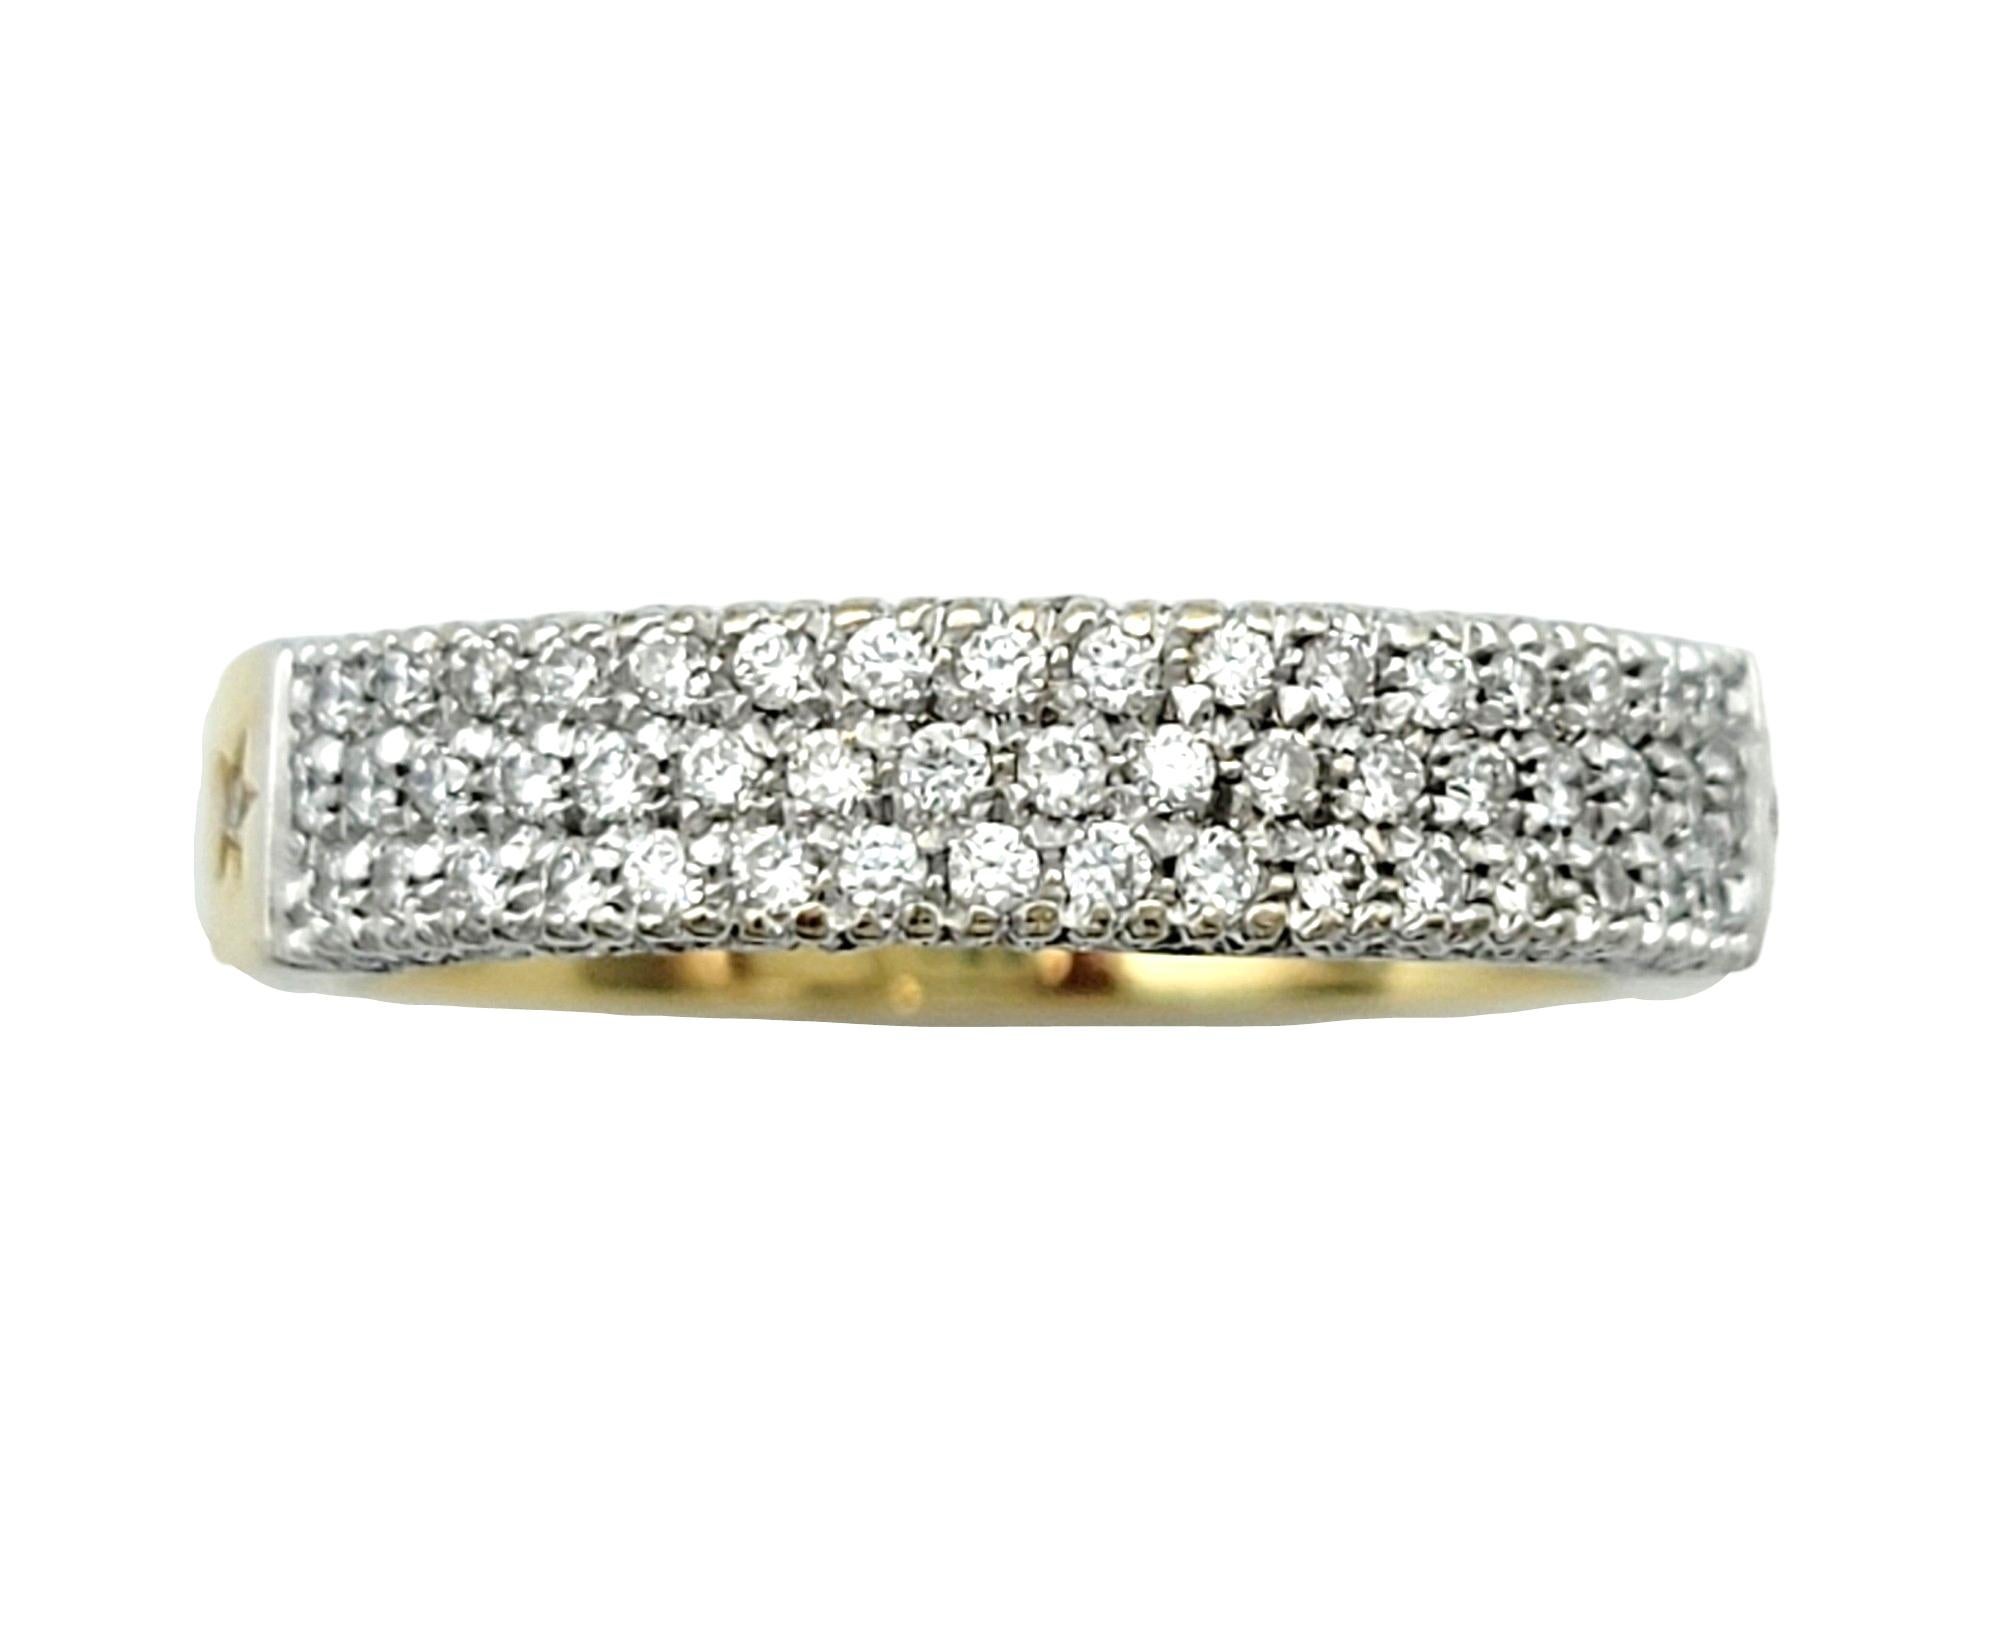 Round Cut H. Stern Triple Row Diamond Band Ring with Star Designs in 18 Karat Yellow Gold For Sale